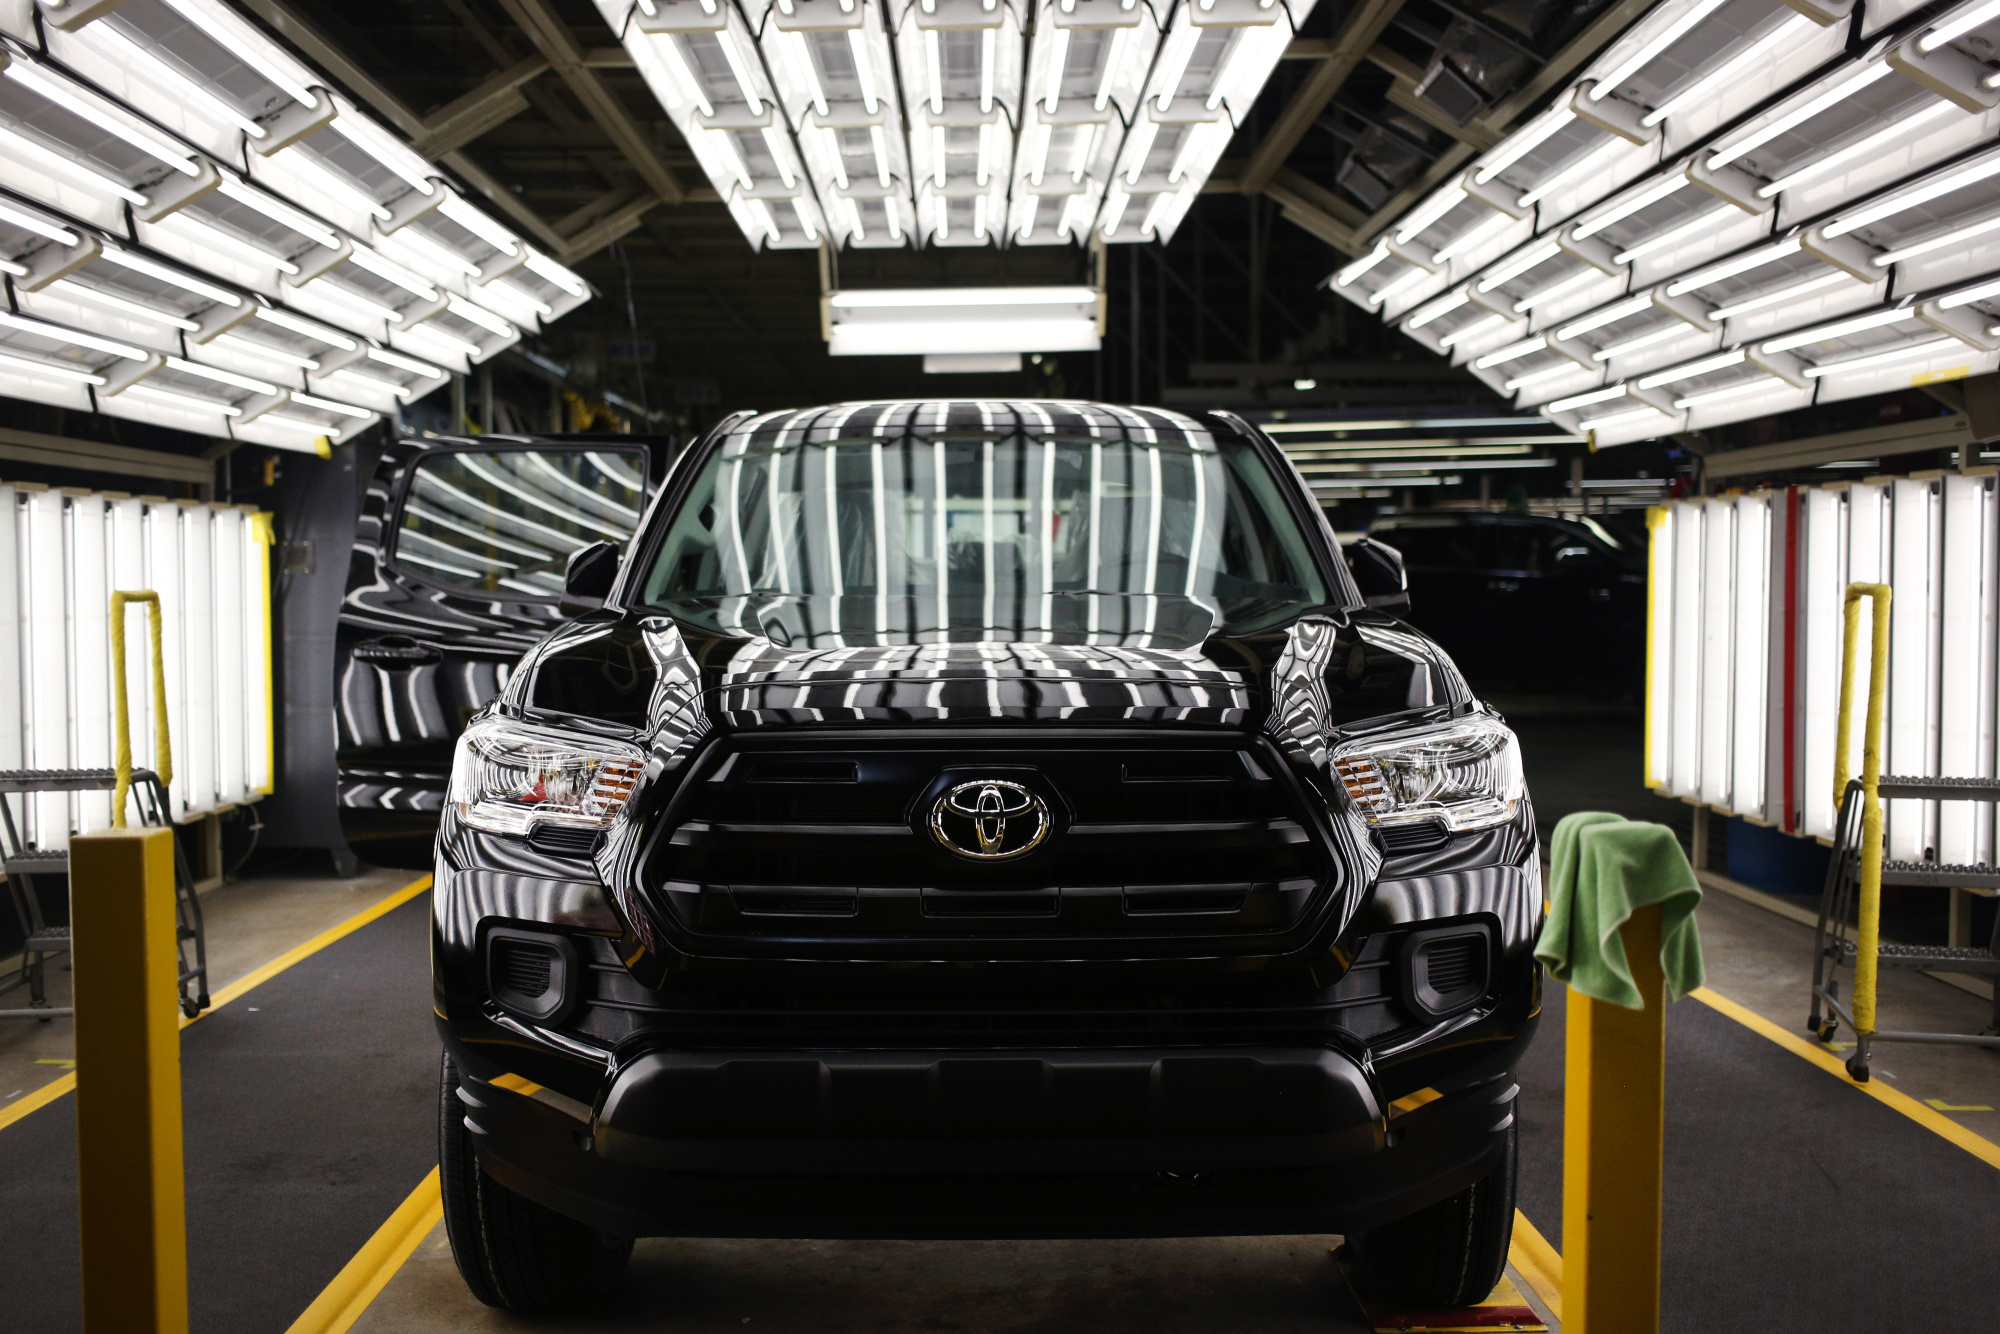 A Toyota Motor Corp. Tacoma pickup truck undergoes an inspection on the assembly line at the company's manufacturing facility in San Antonio, Texas, U.S., on Wednesday, Jan. 20, 2016.&nbsp;